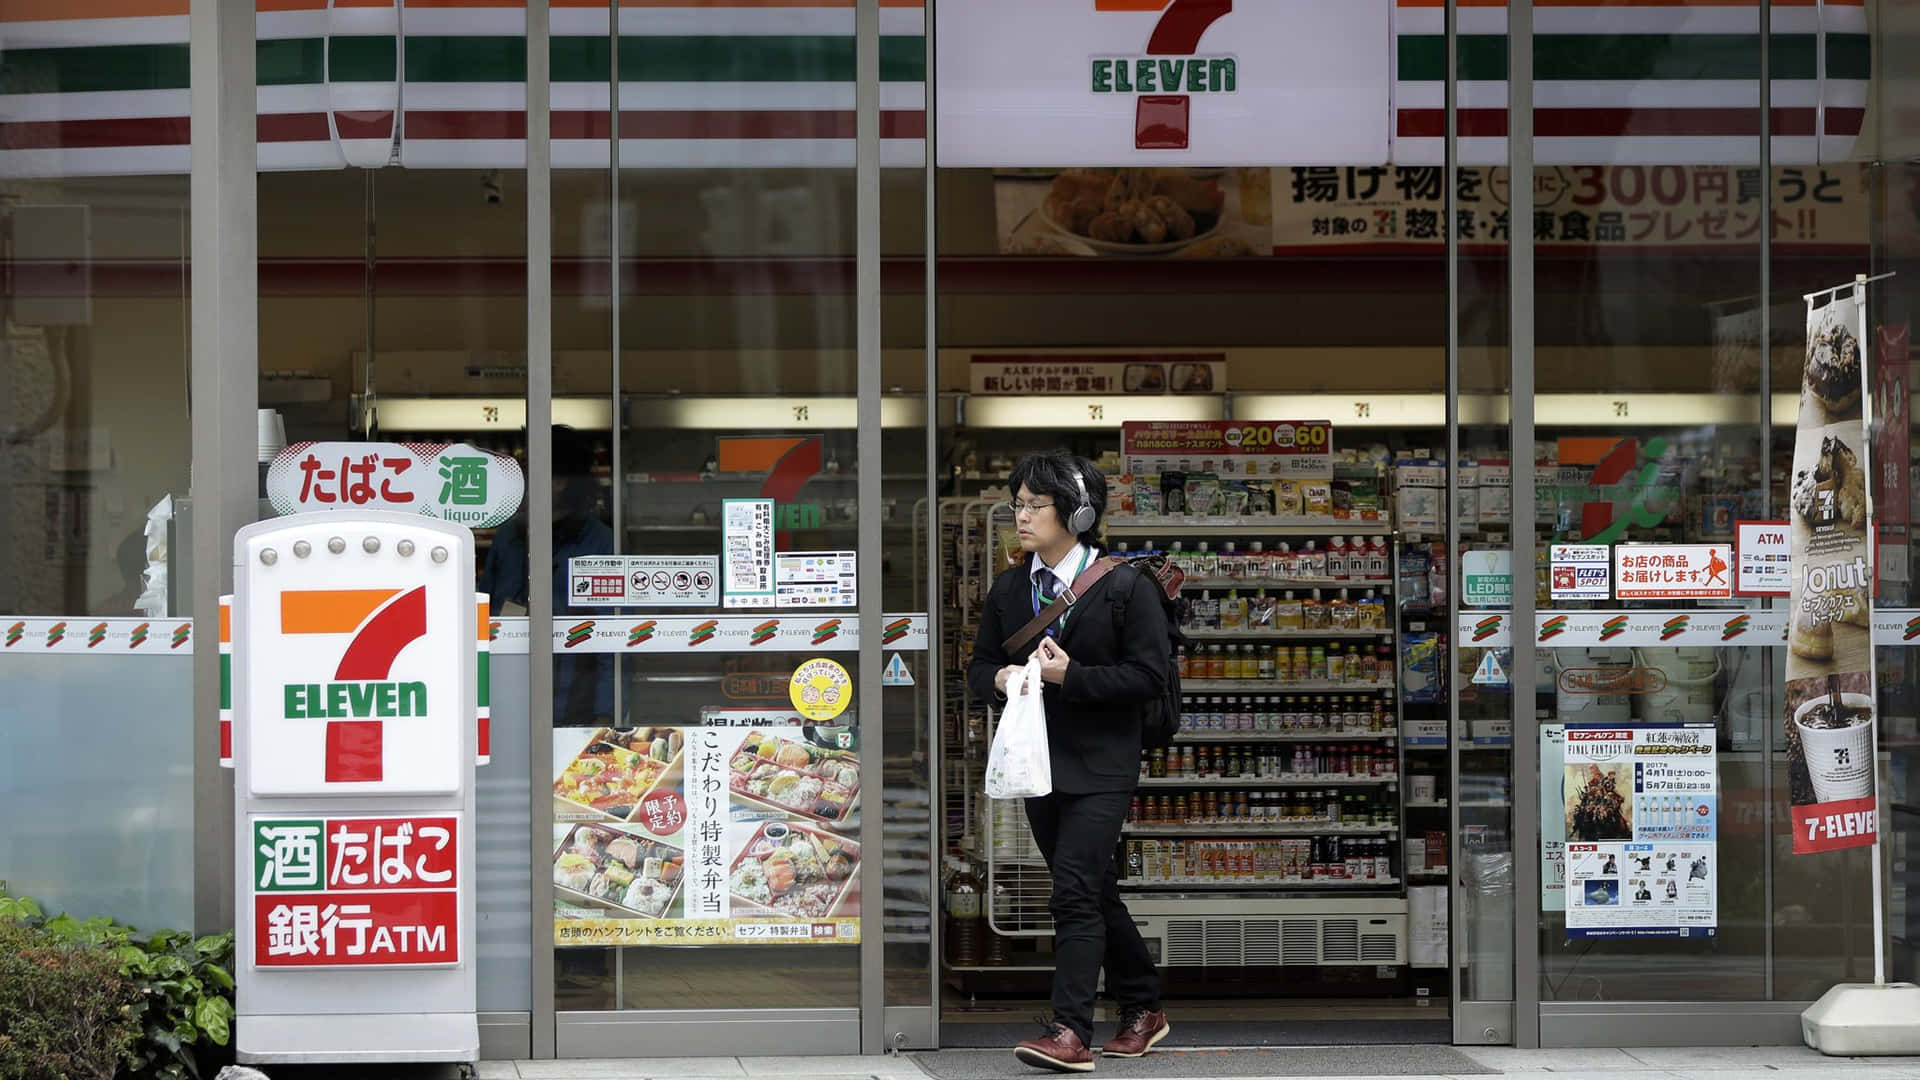 Get your favorite snacks and drinks at 7 Eleven.